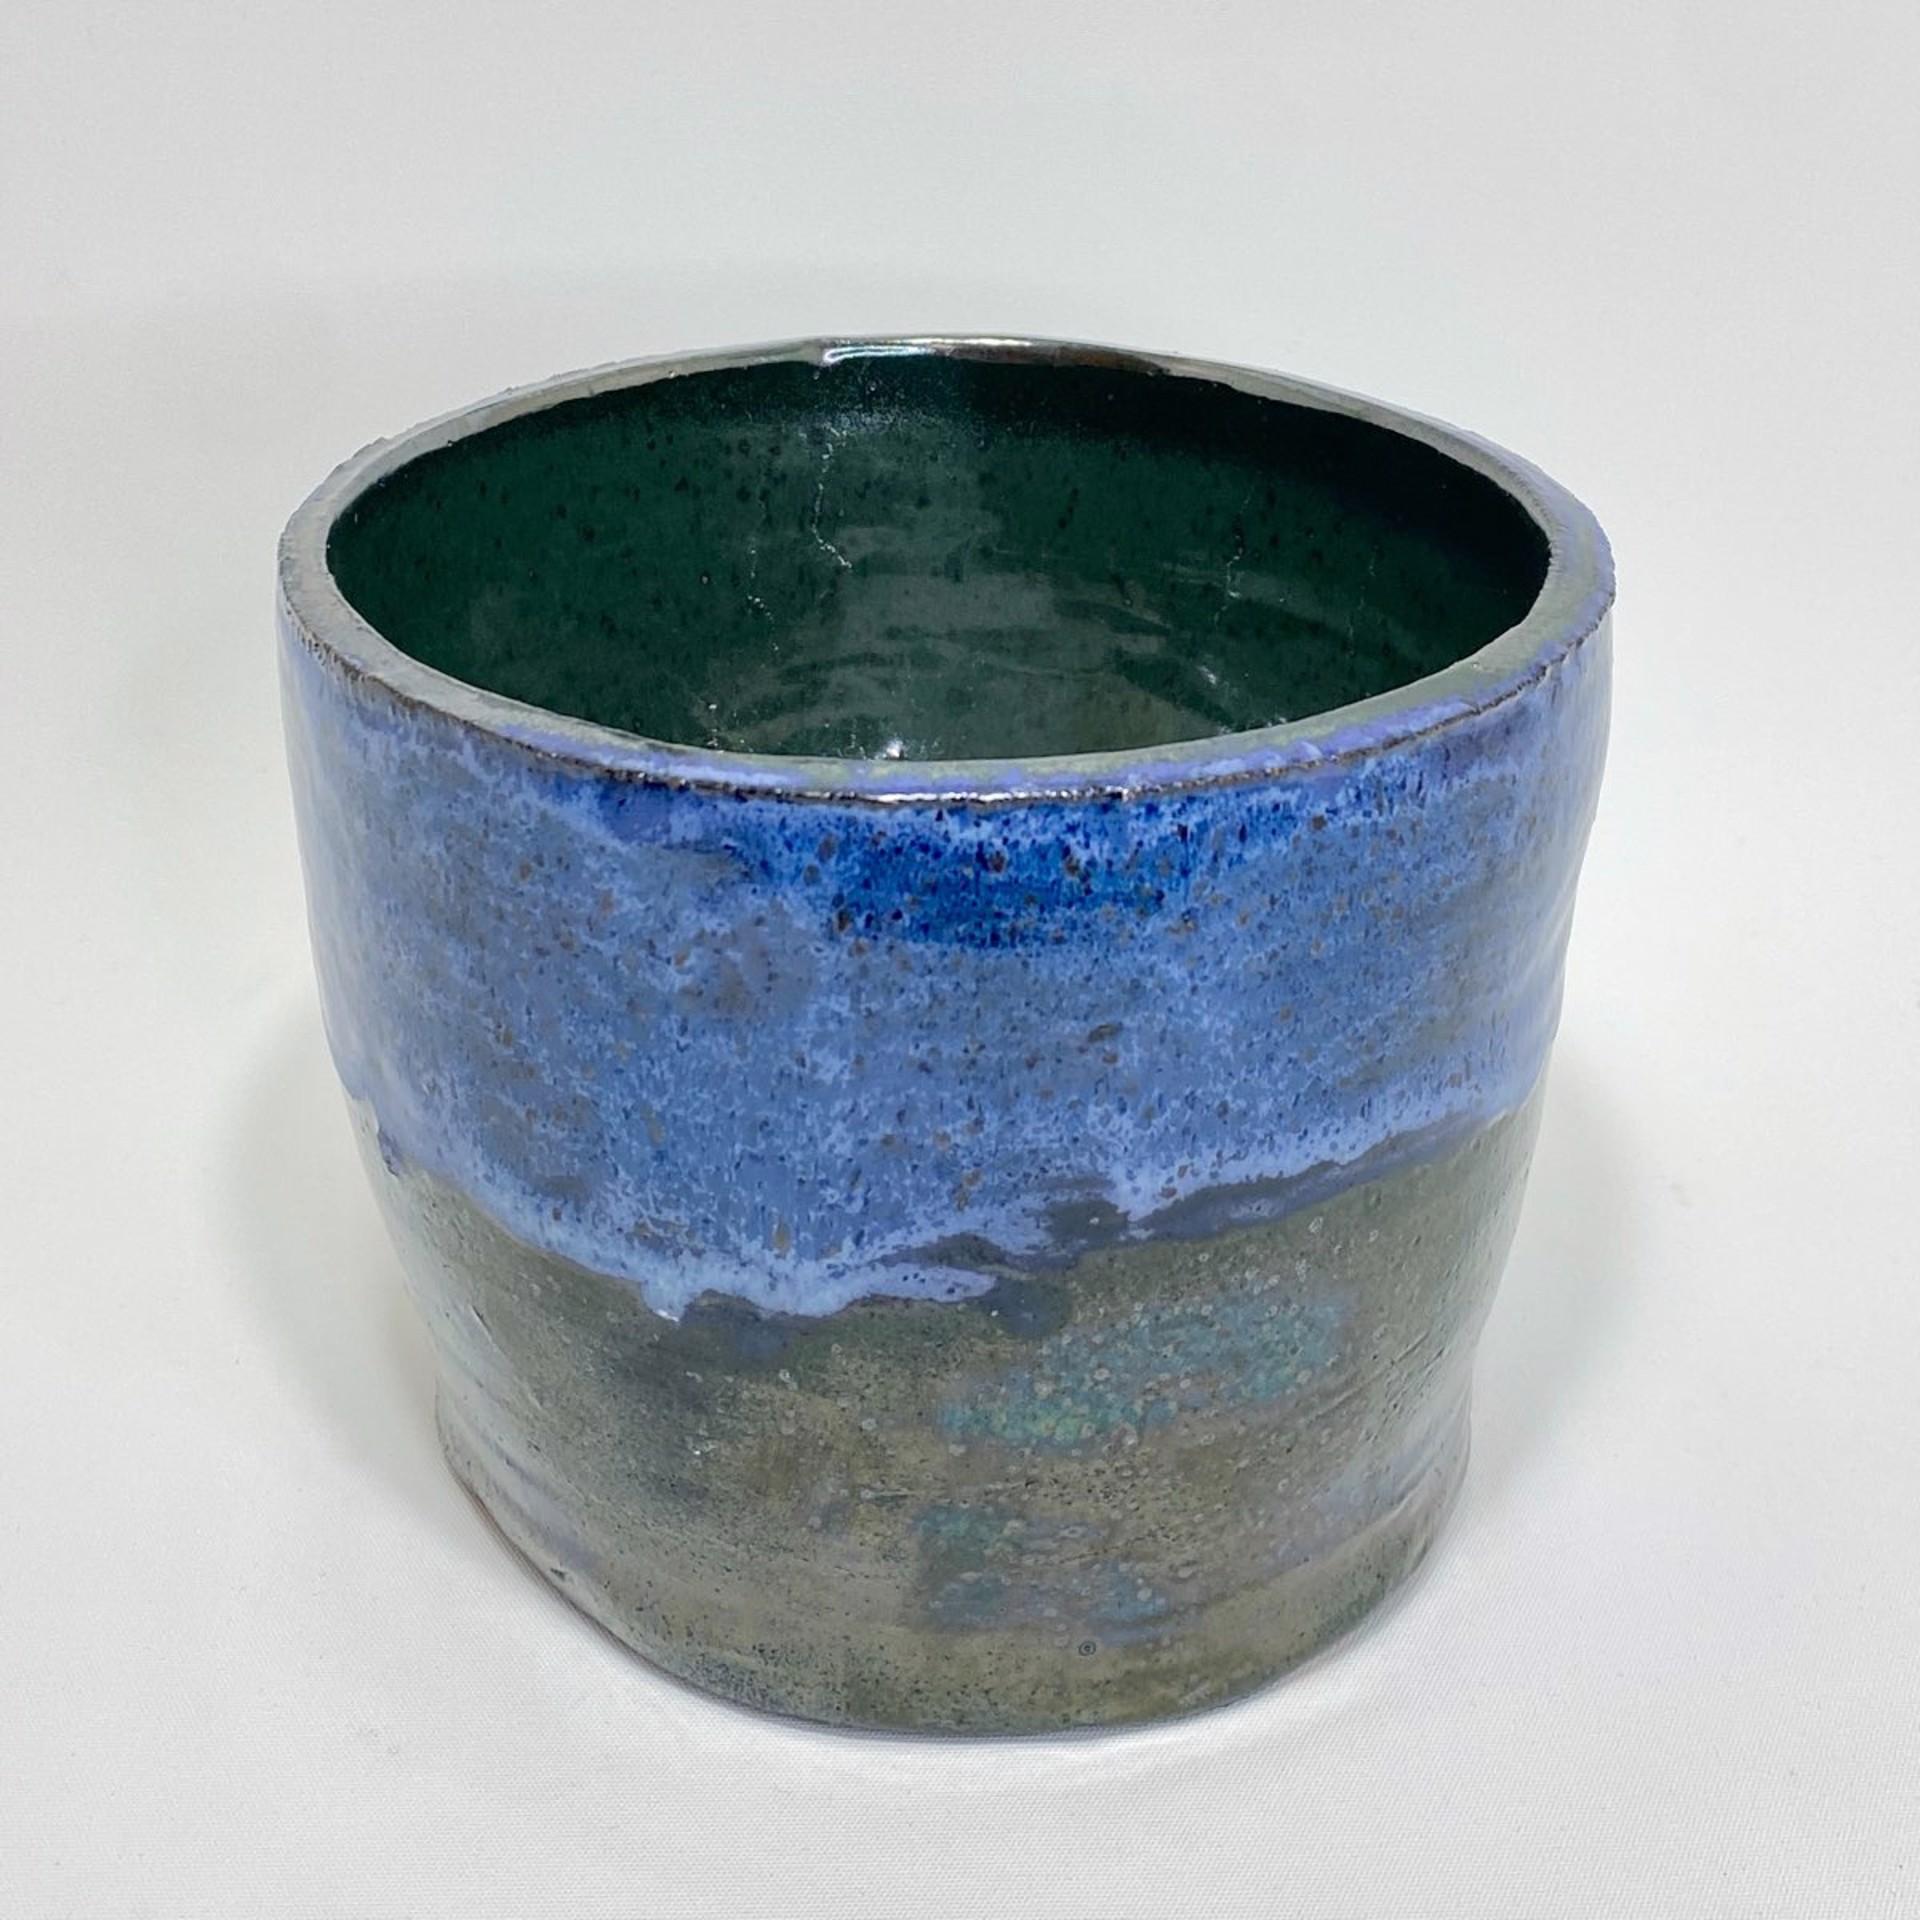 "Green Bowl w/ Blue Rim" by Justin S. by One Step Beyond